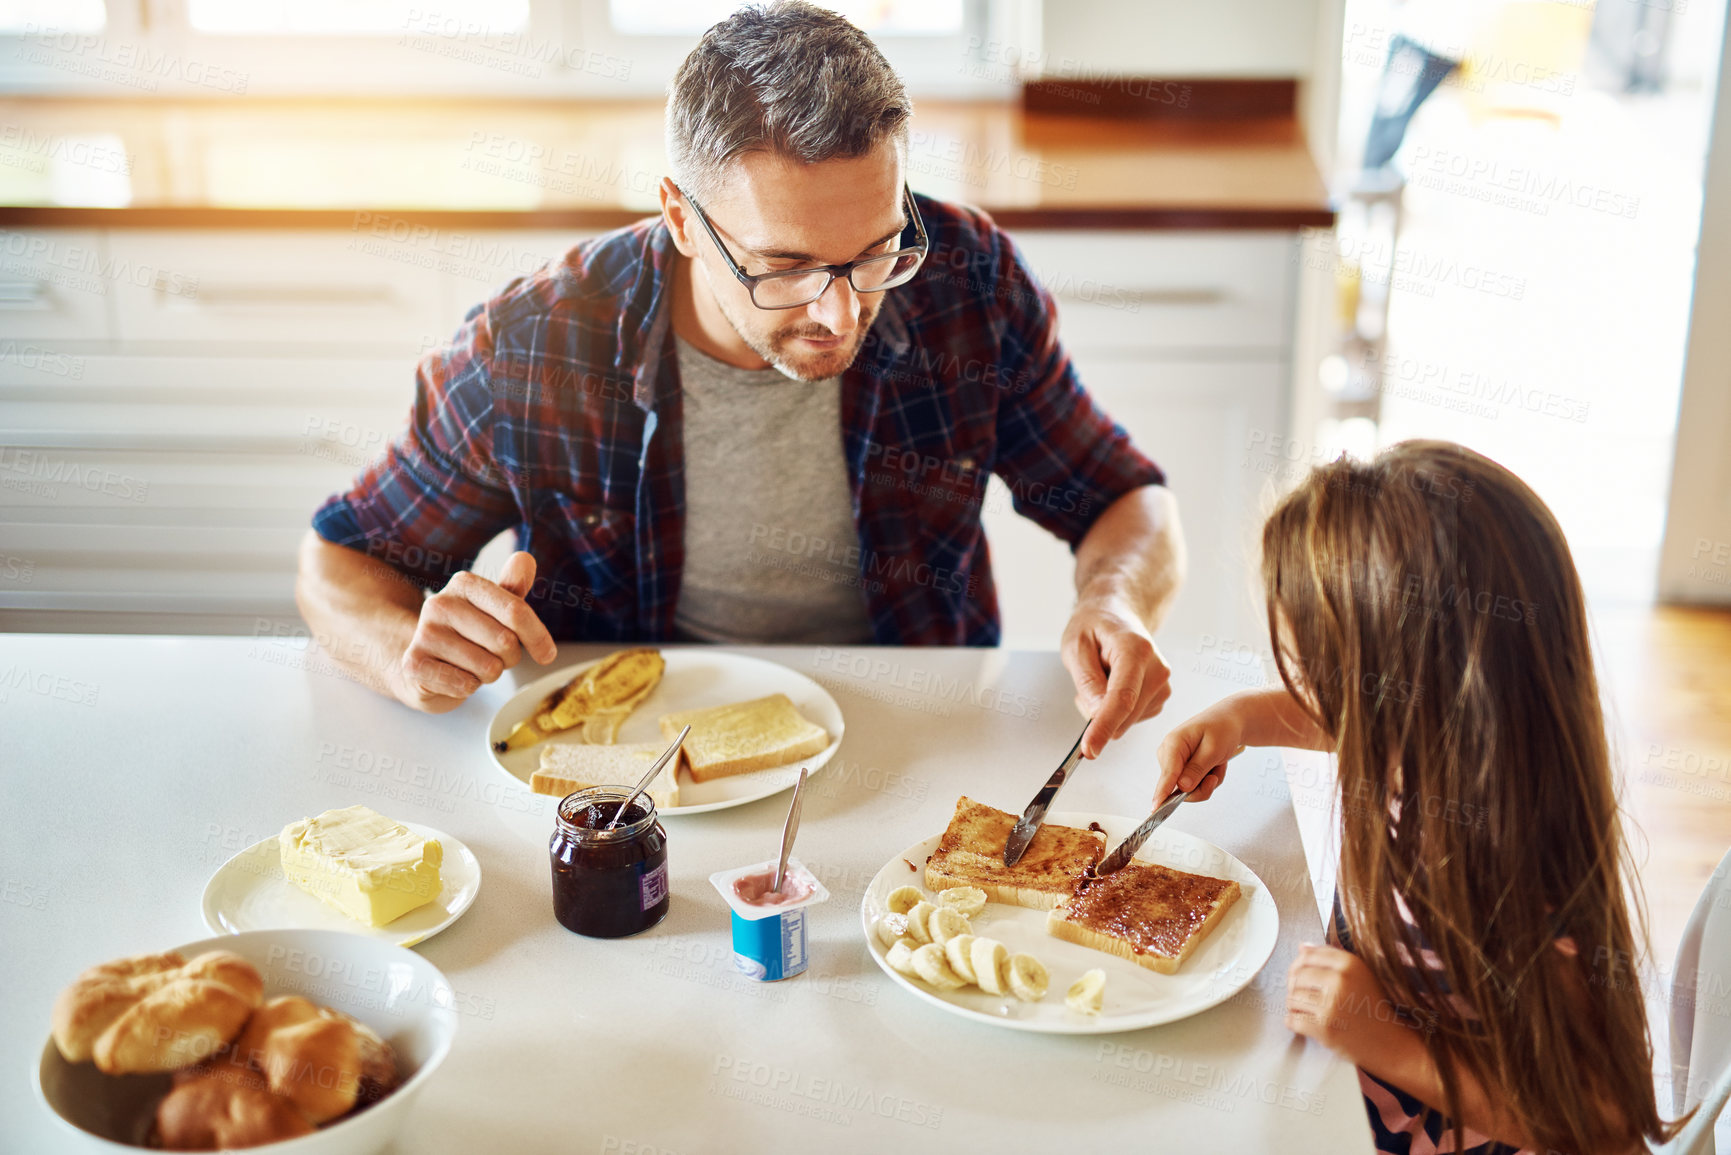 Buy stock photo Cropped shot of an adorable little girl having breakfast with her father in the kitchen